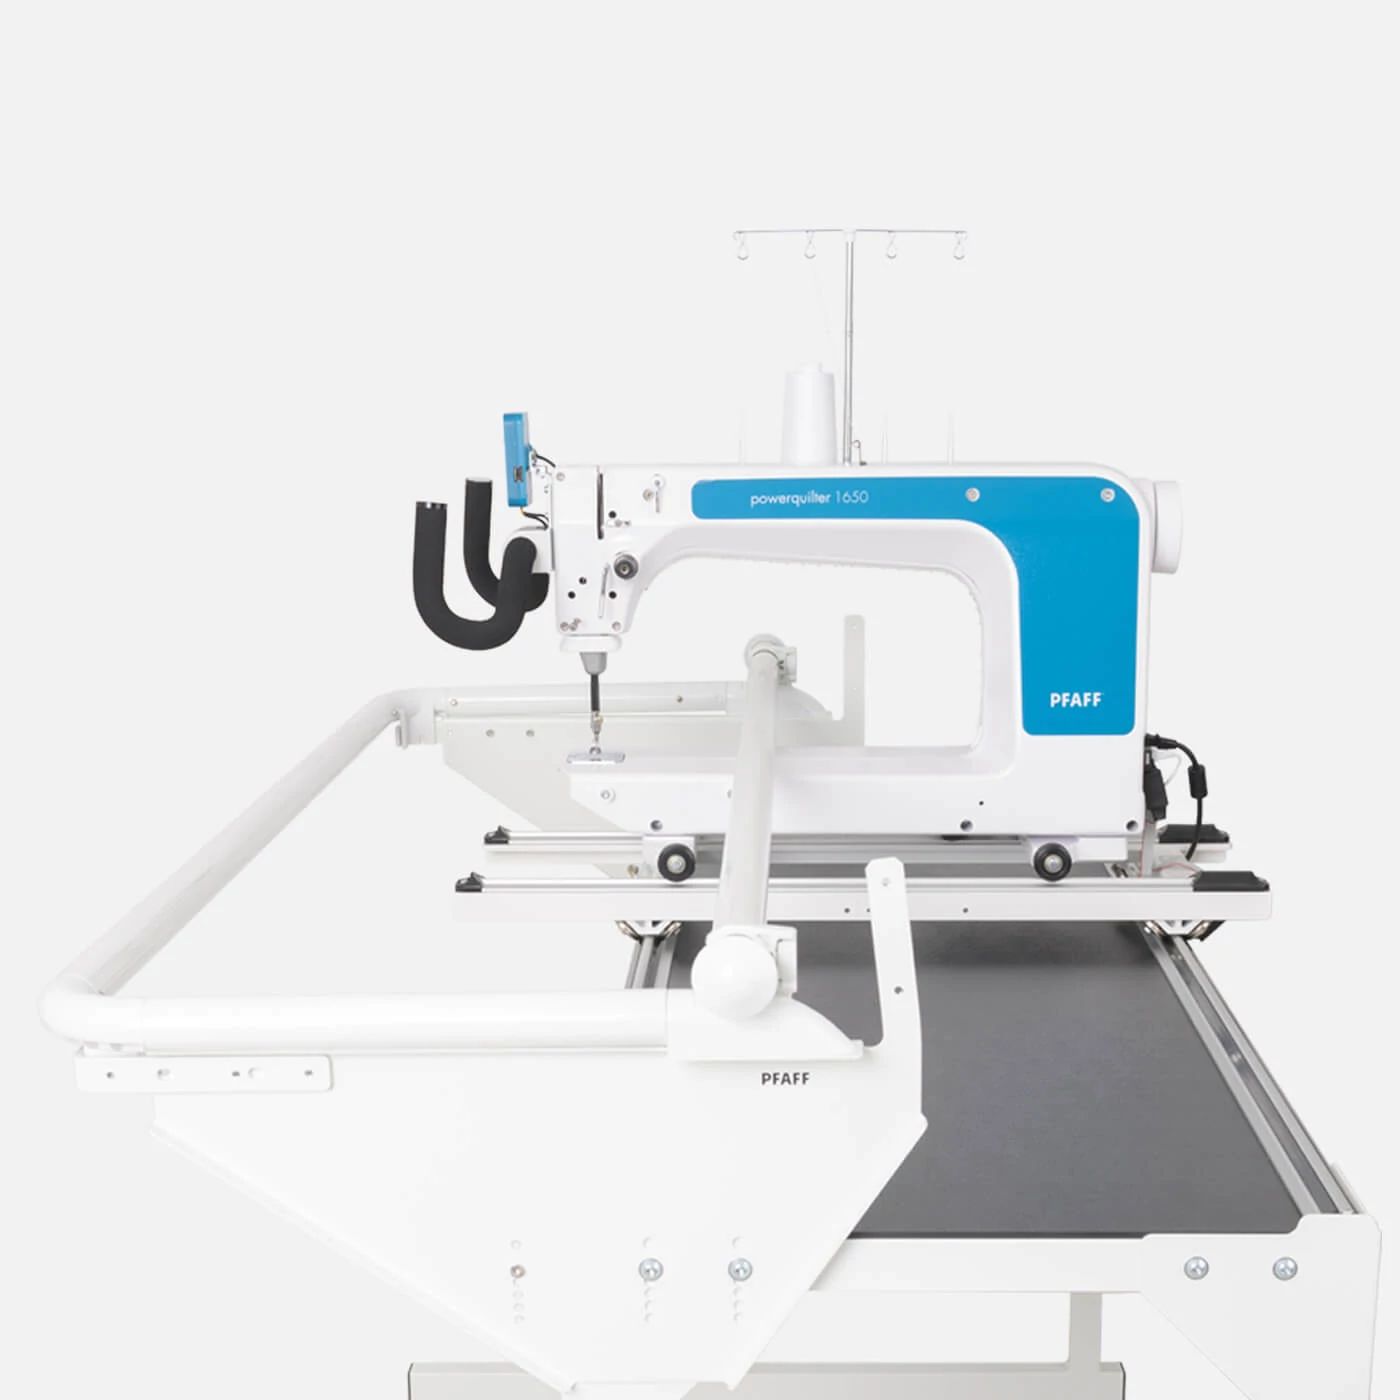 Janome Quilt Maker Pro 18 Versa Longarm Quilting Machine with Sit-Down Table